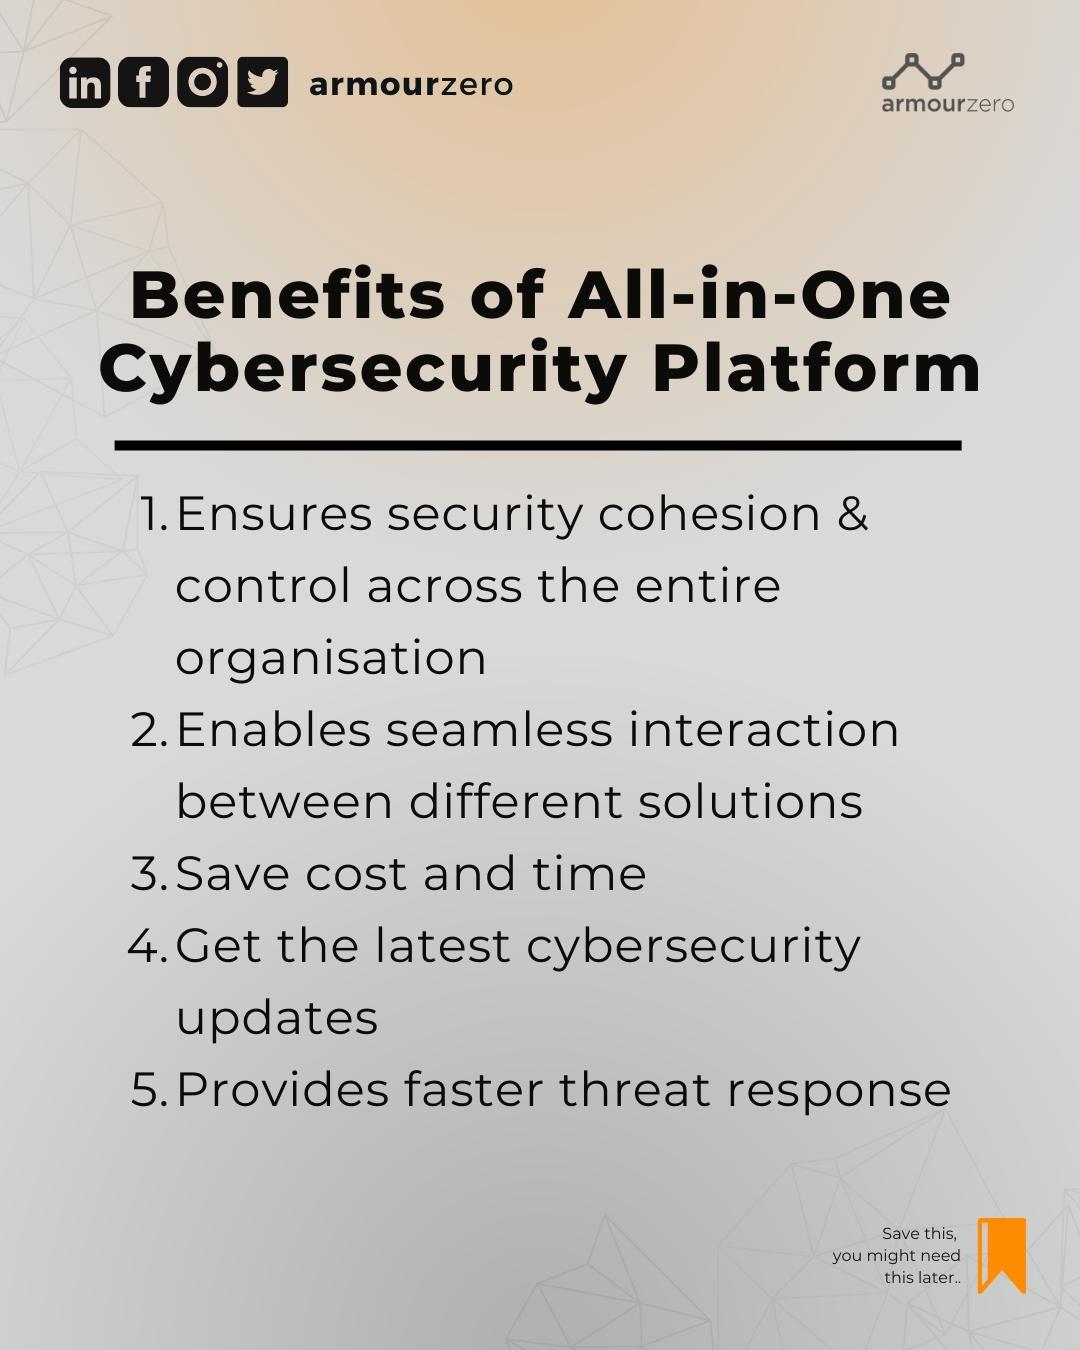 Benefits of all-in-one cybersecurity platform ArmourZero